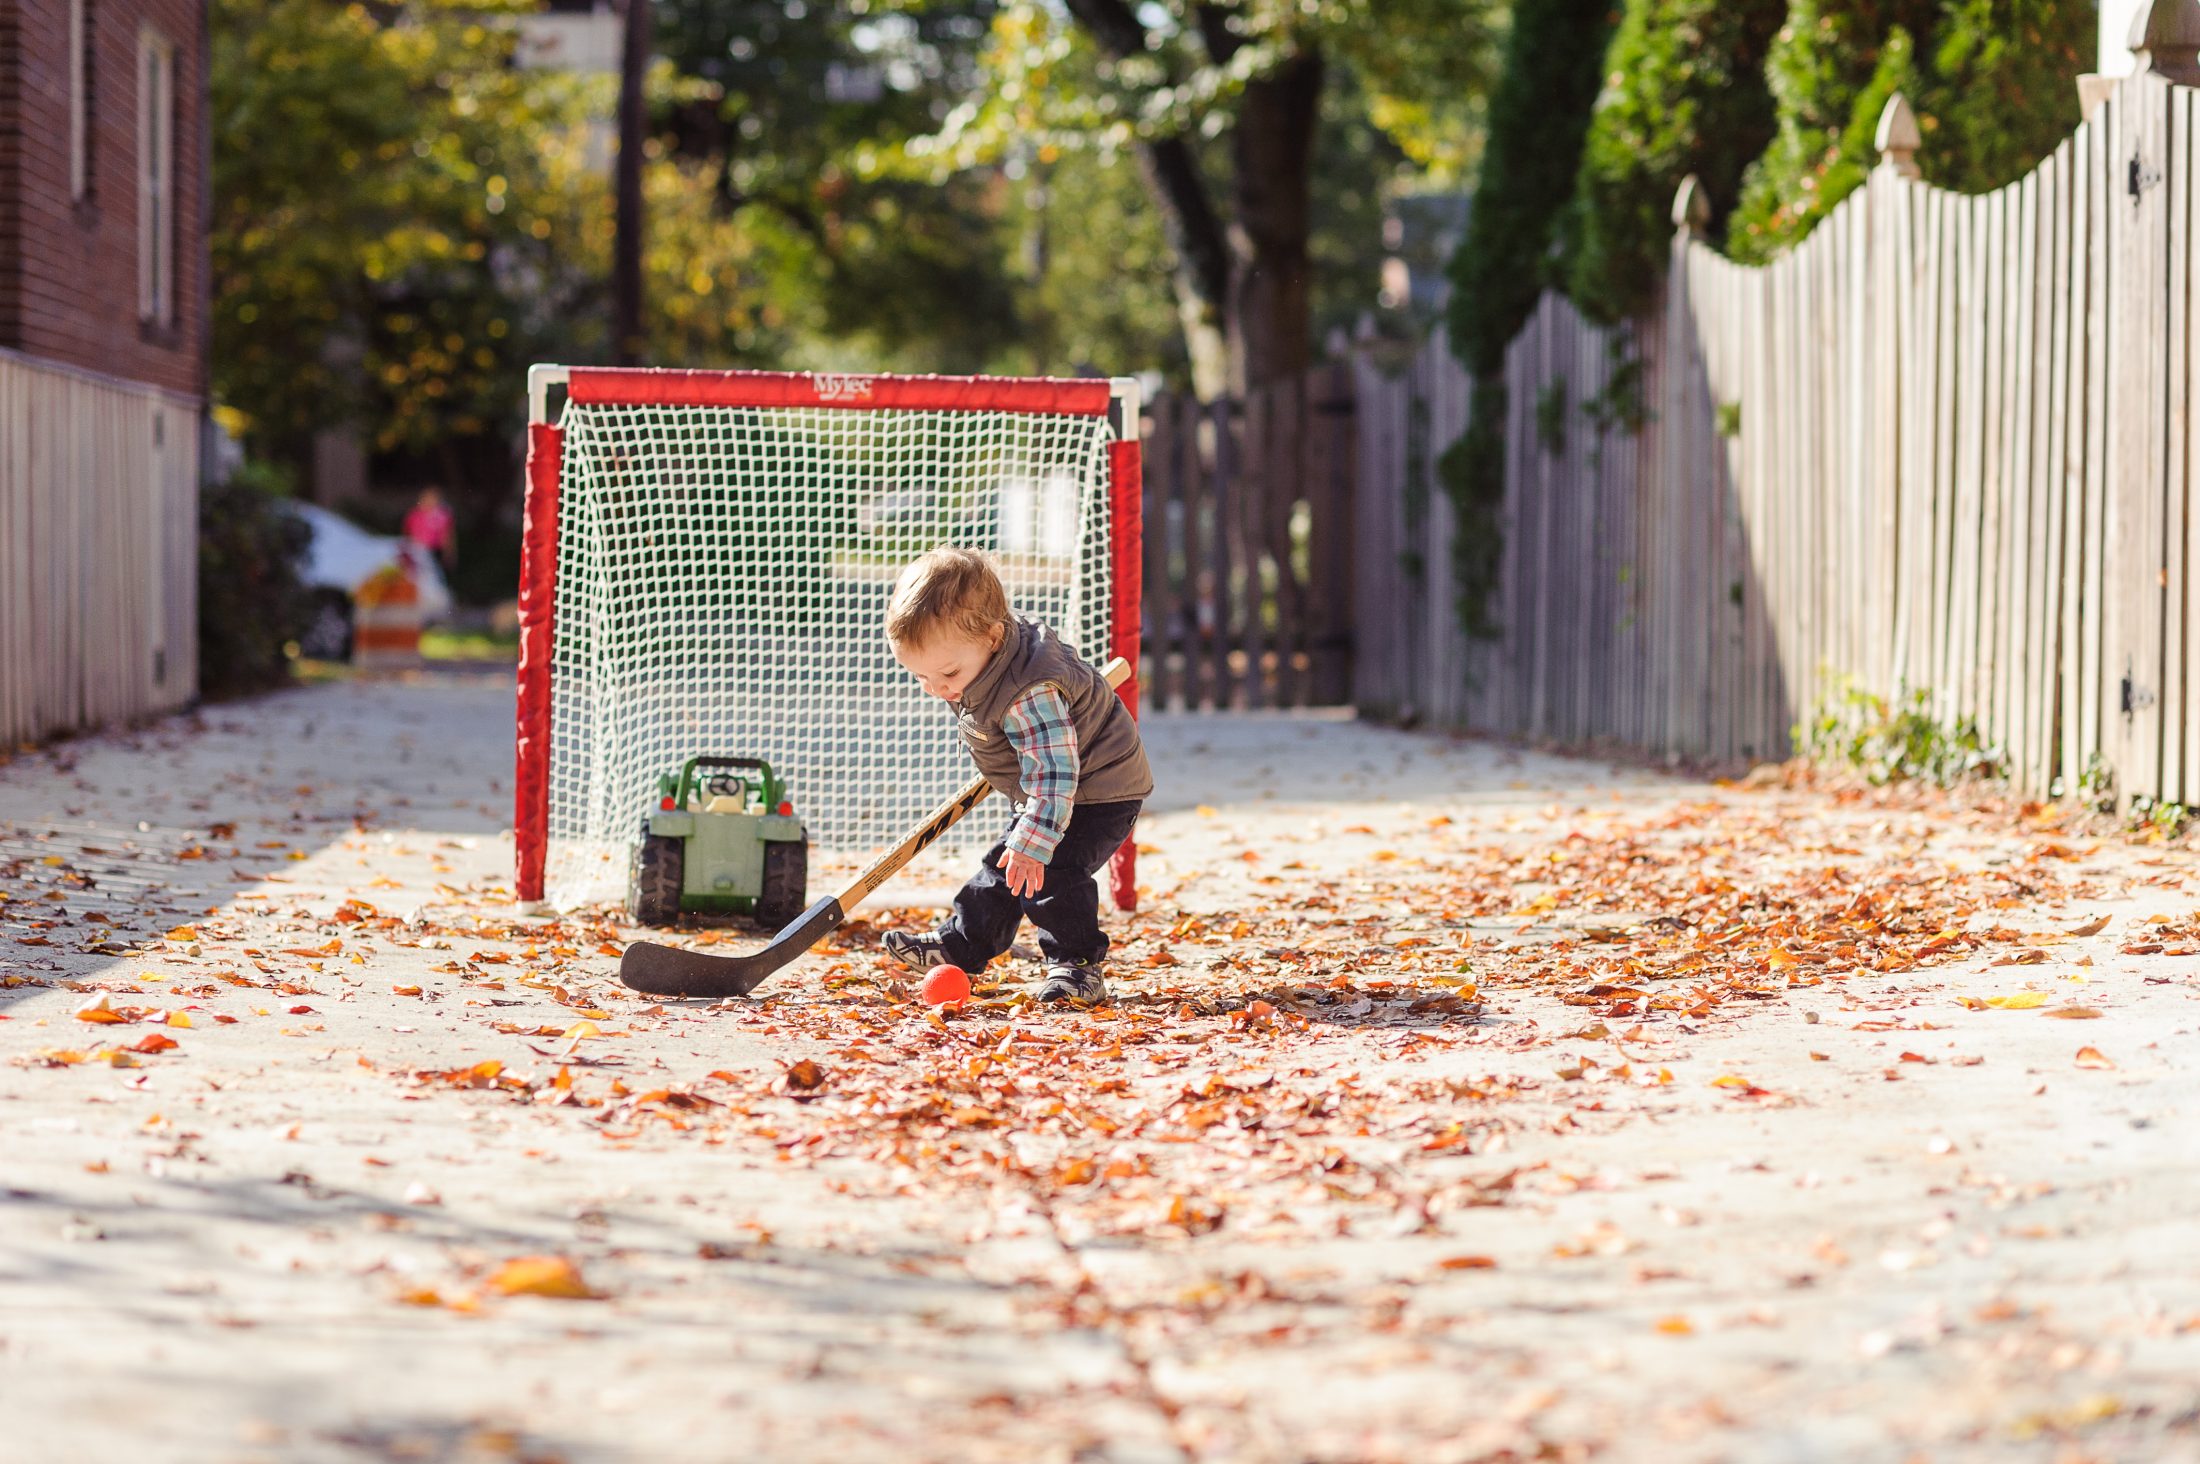 Tommy Brimley playing hockey in alley by Brimley house